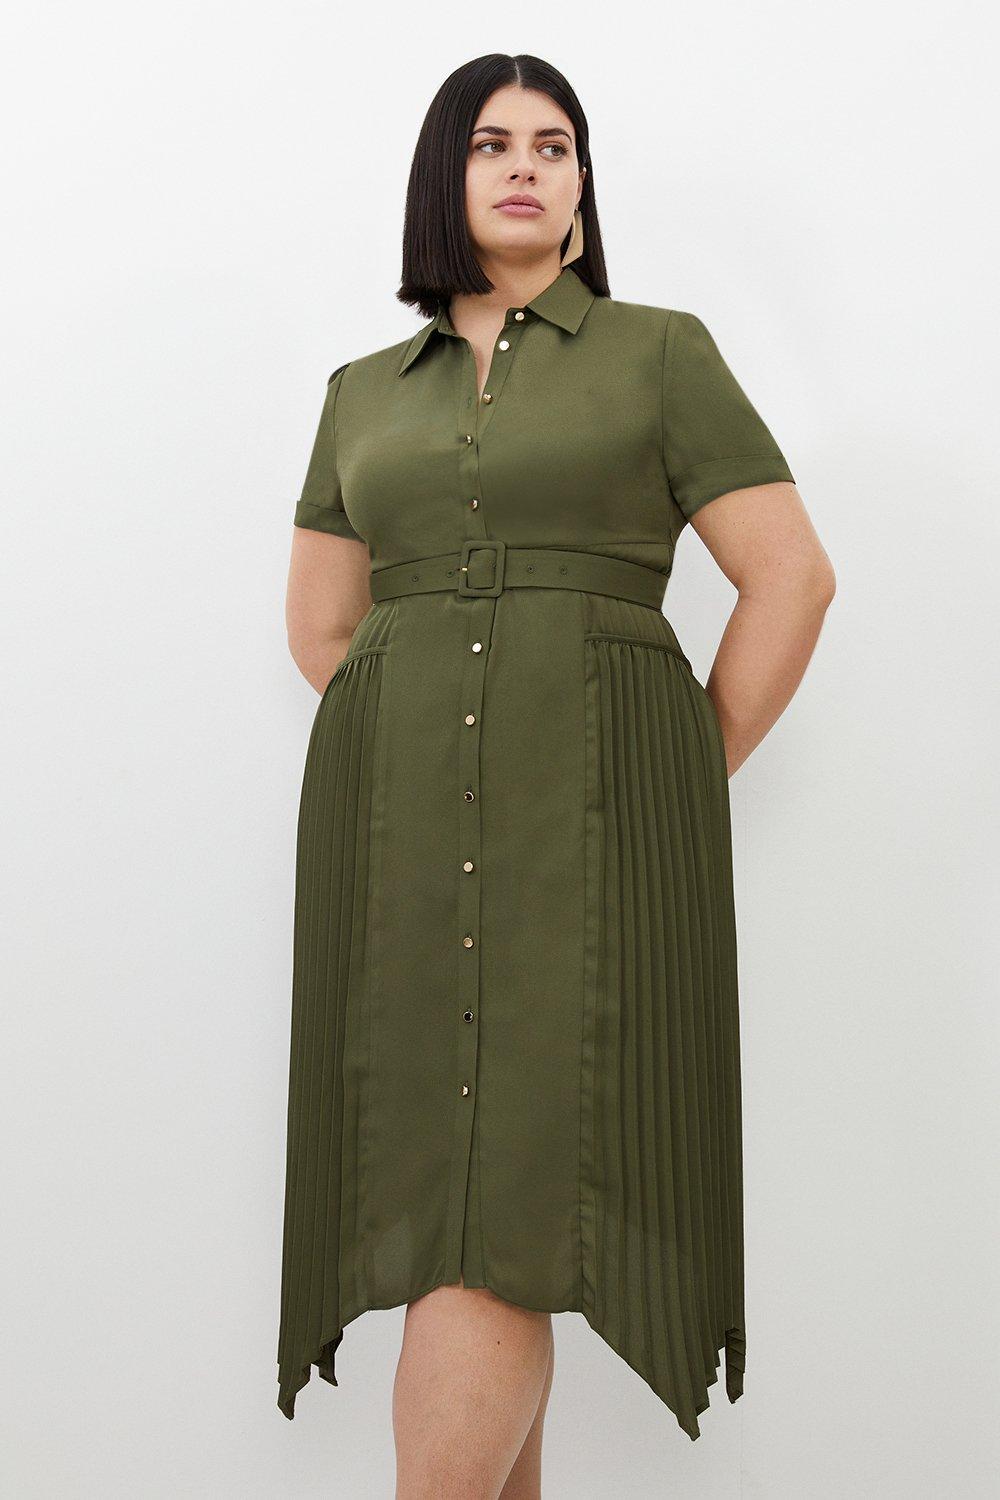 Dresses, dresses and more dresses this Summer! #dresses #fashion #style # miladys #new #womensfashion #womensstyle #plussize #plussizefashion  #inmymiladys